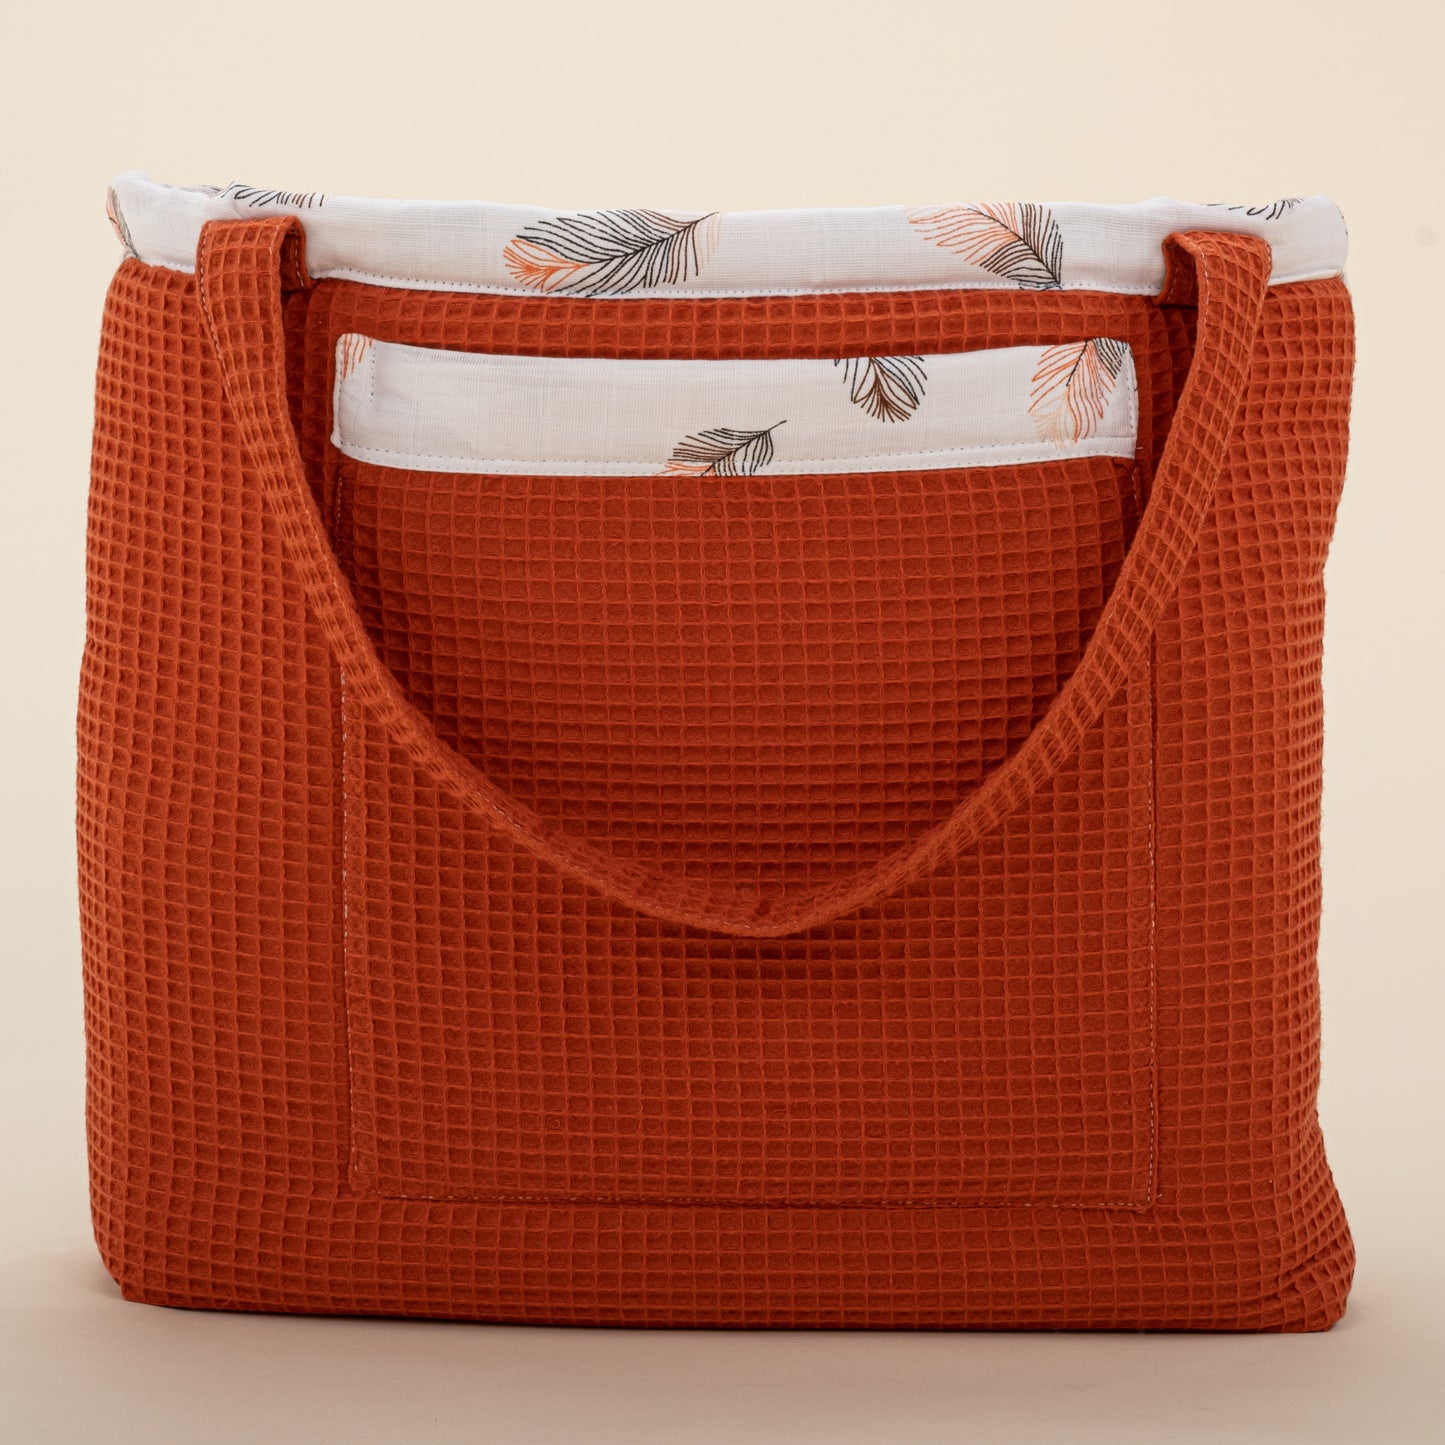 Baby Care Bag - Tile Honeycomb - Orange Feather